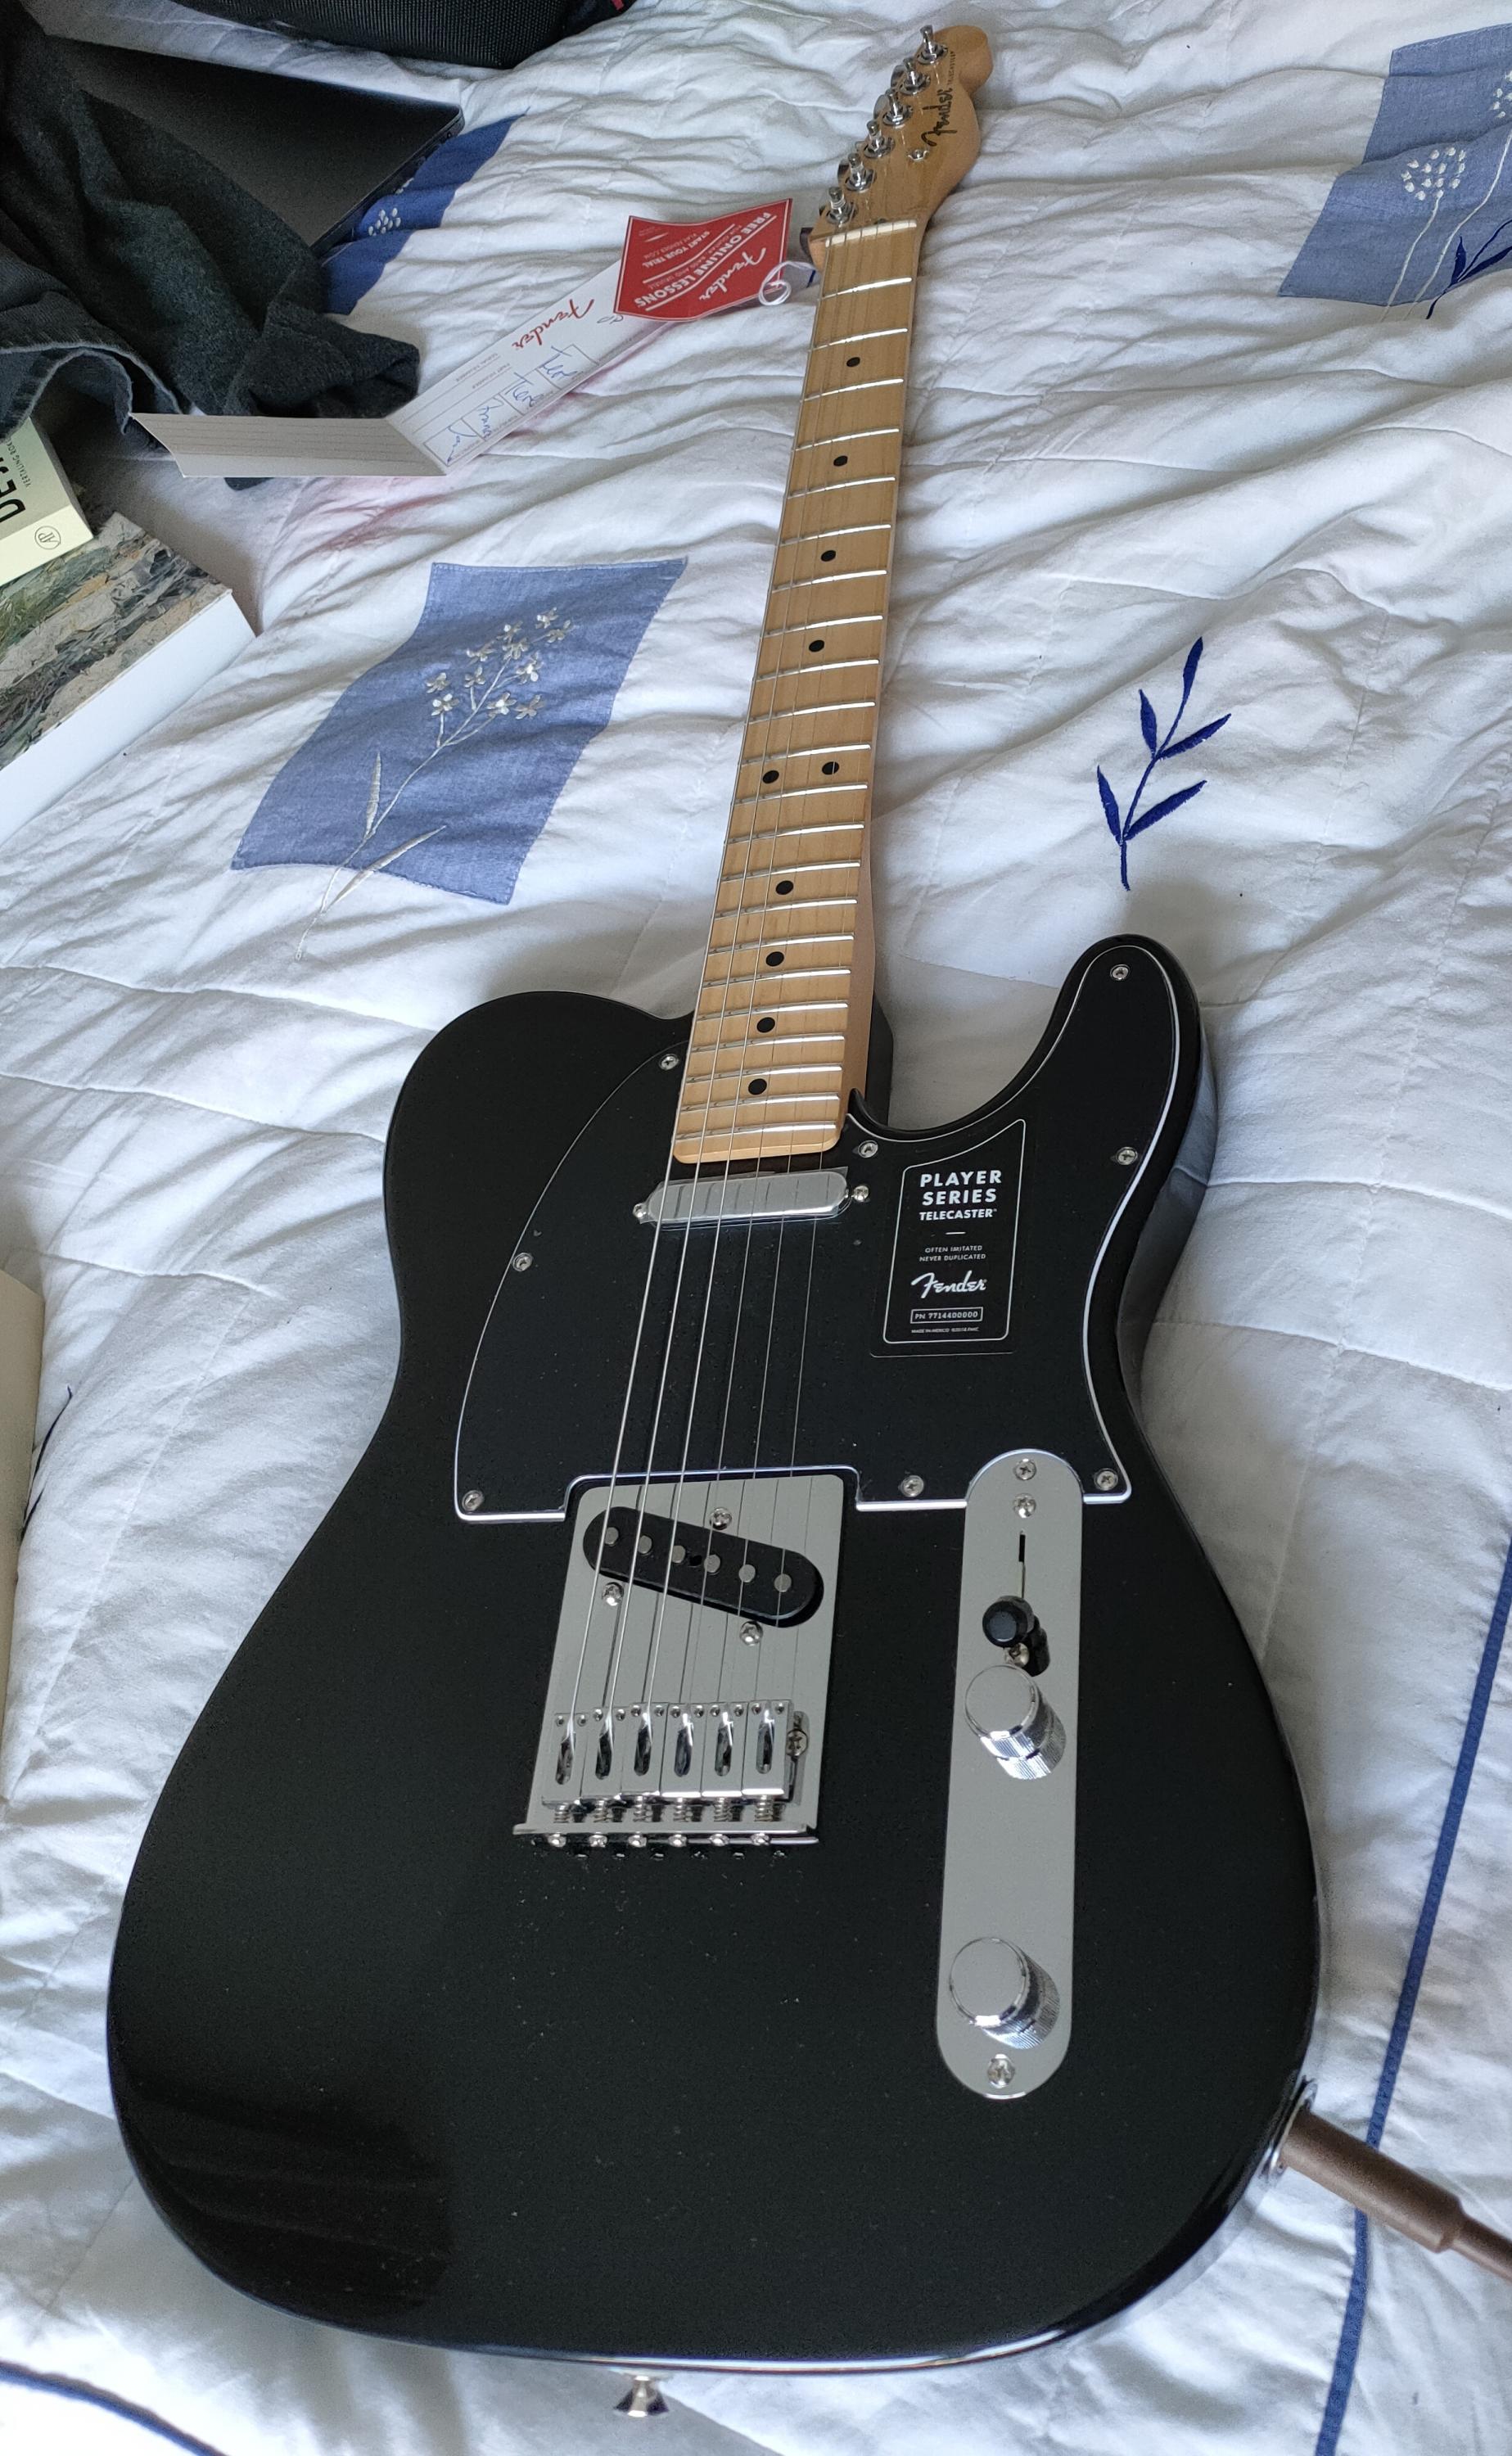 Telecaster Love Thread, No Archtops Allowed-img_20210223_144537-jpg